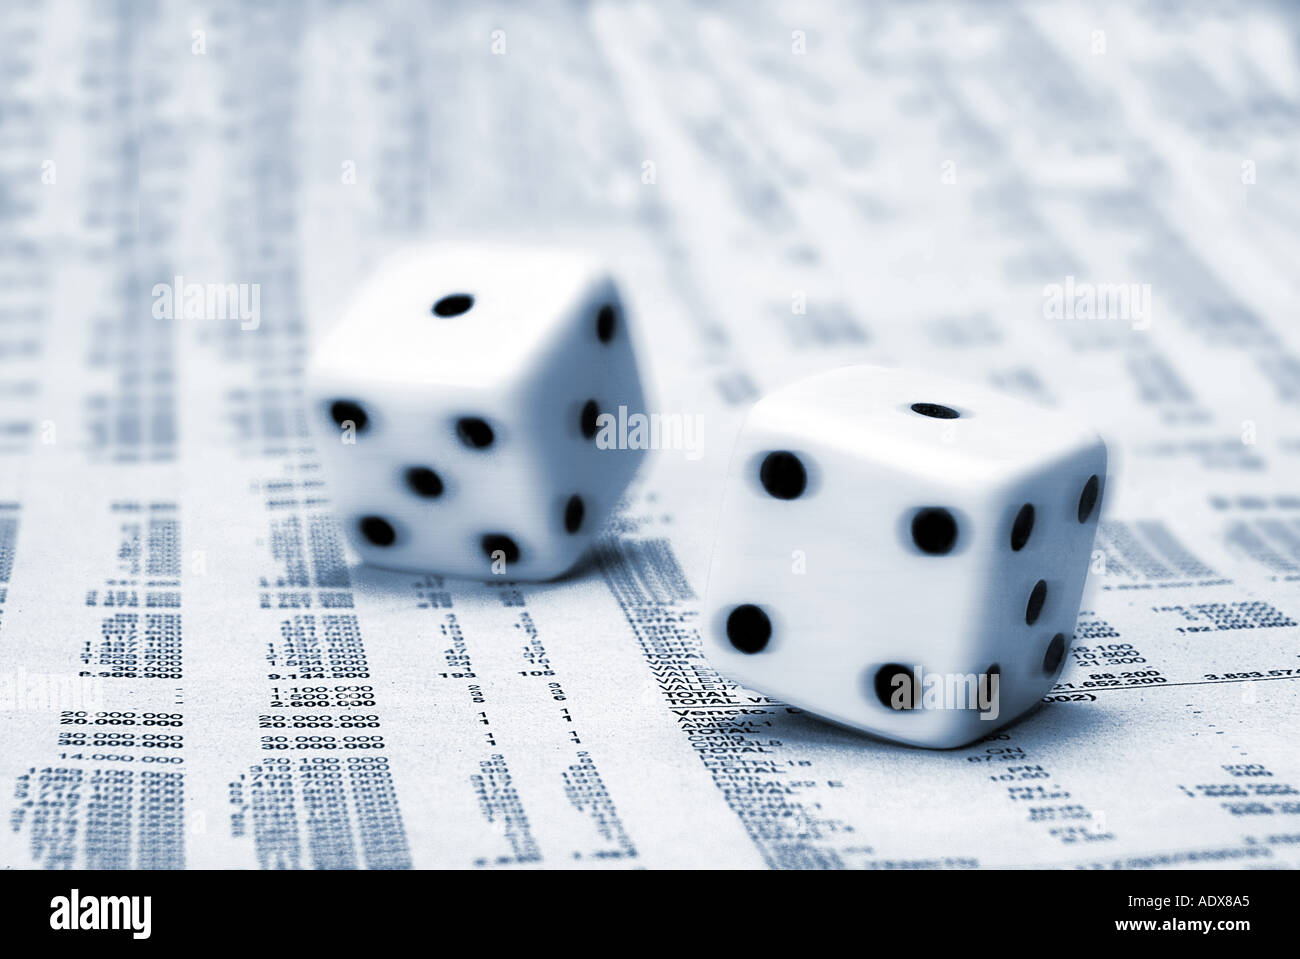 Business Concepts II holding dice die chance gambling bone bones throw luck roll newspaper finance page stock market bluish Stock Photo